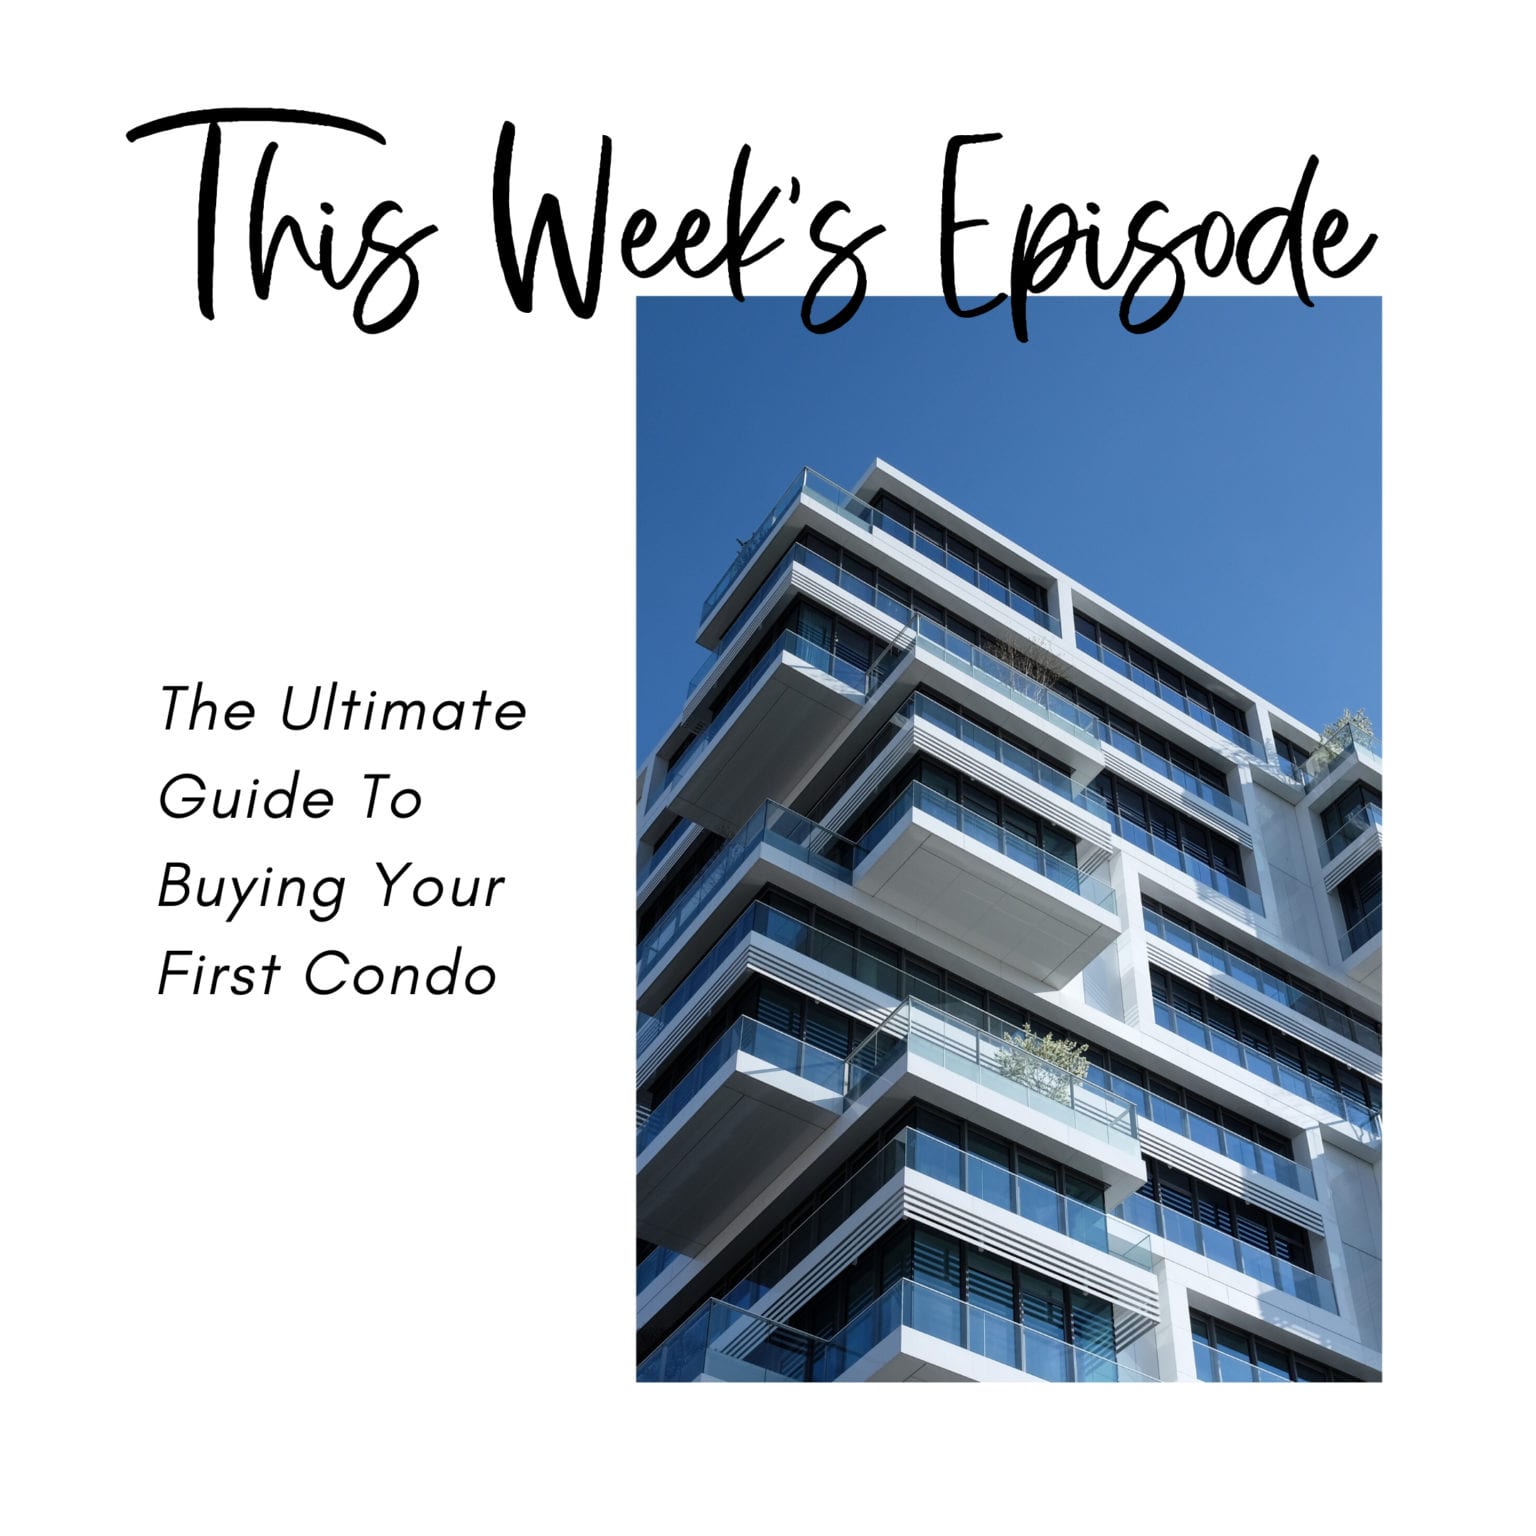 The Ultimate Guide To Buying Your First Condo